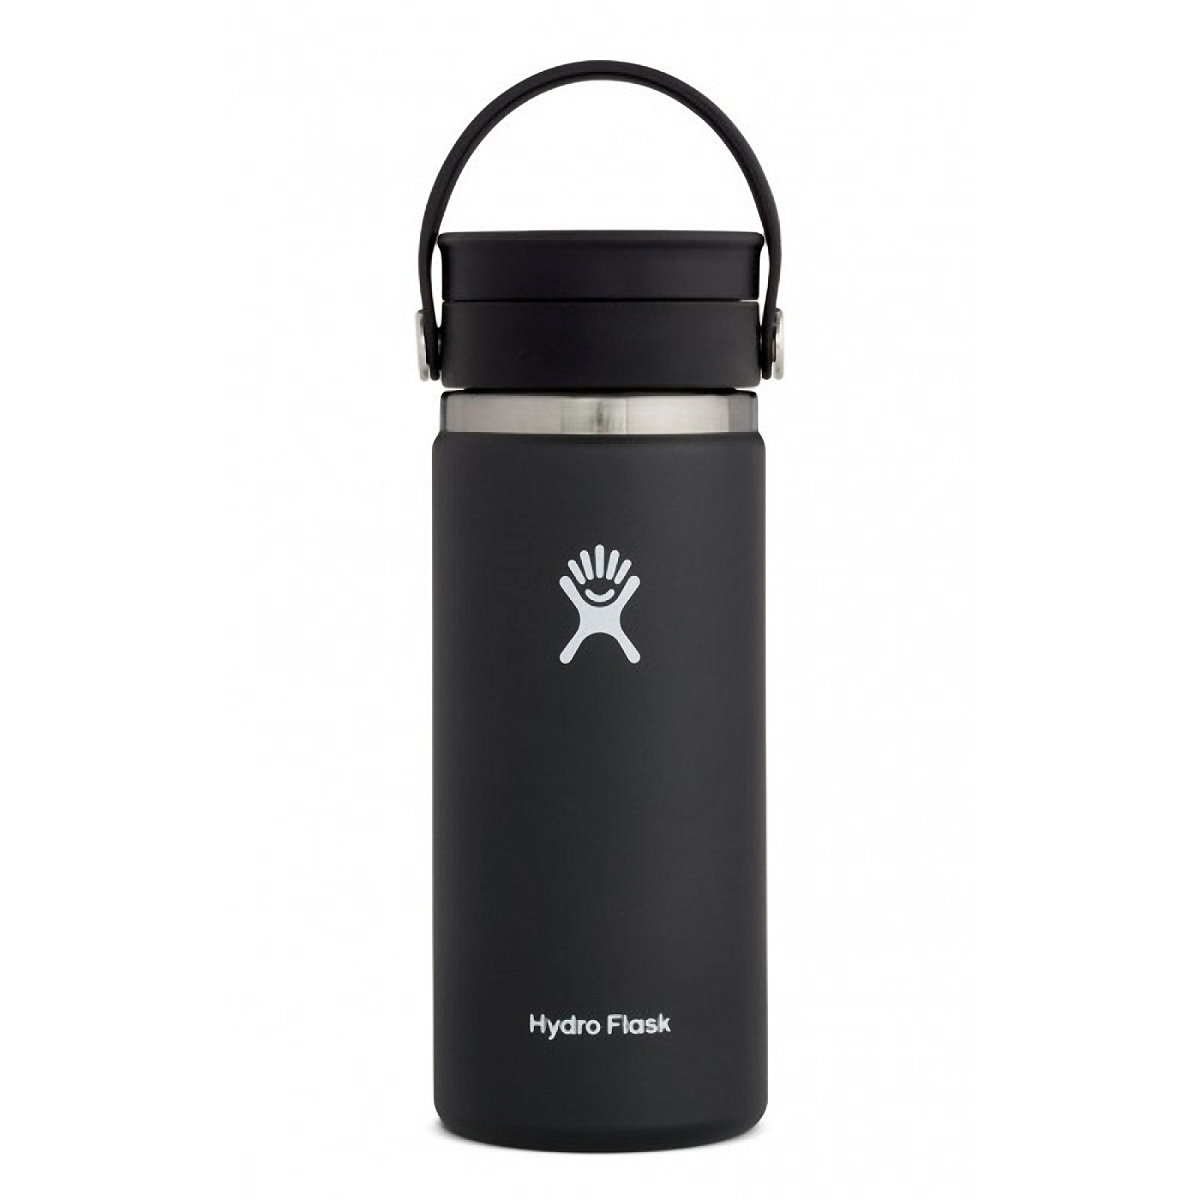 16-Oz Hydro Flask Hot or Cold Coffee Bottle w Flex Sip Lid (2 colors) $18.38 + free shipping